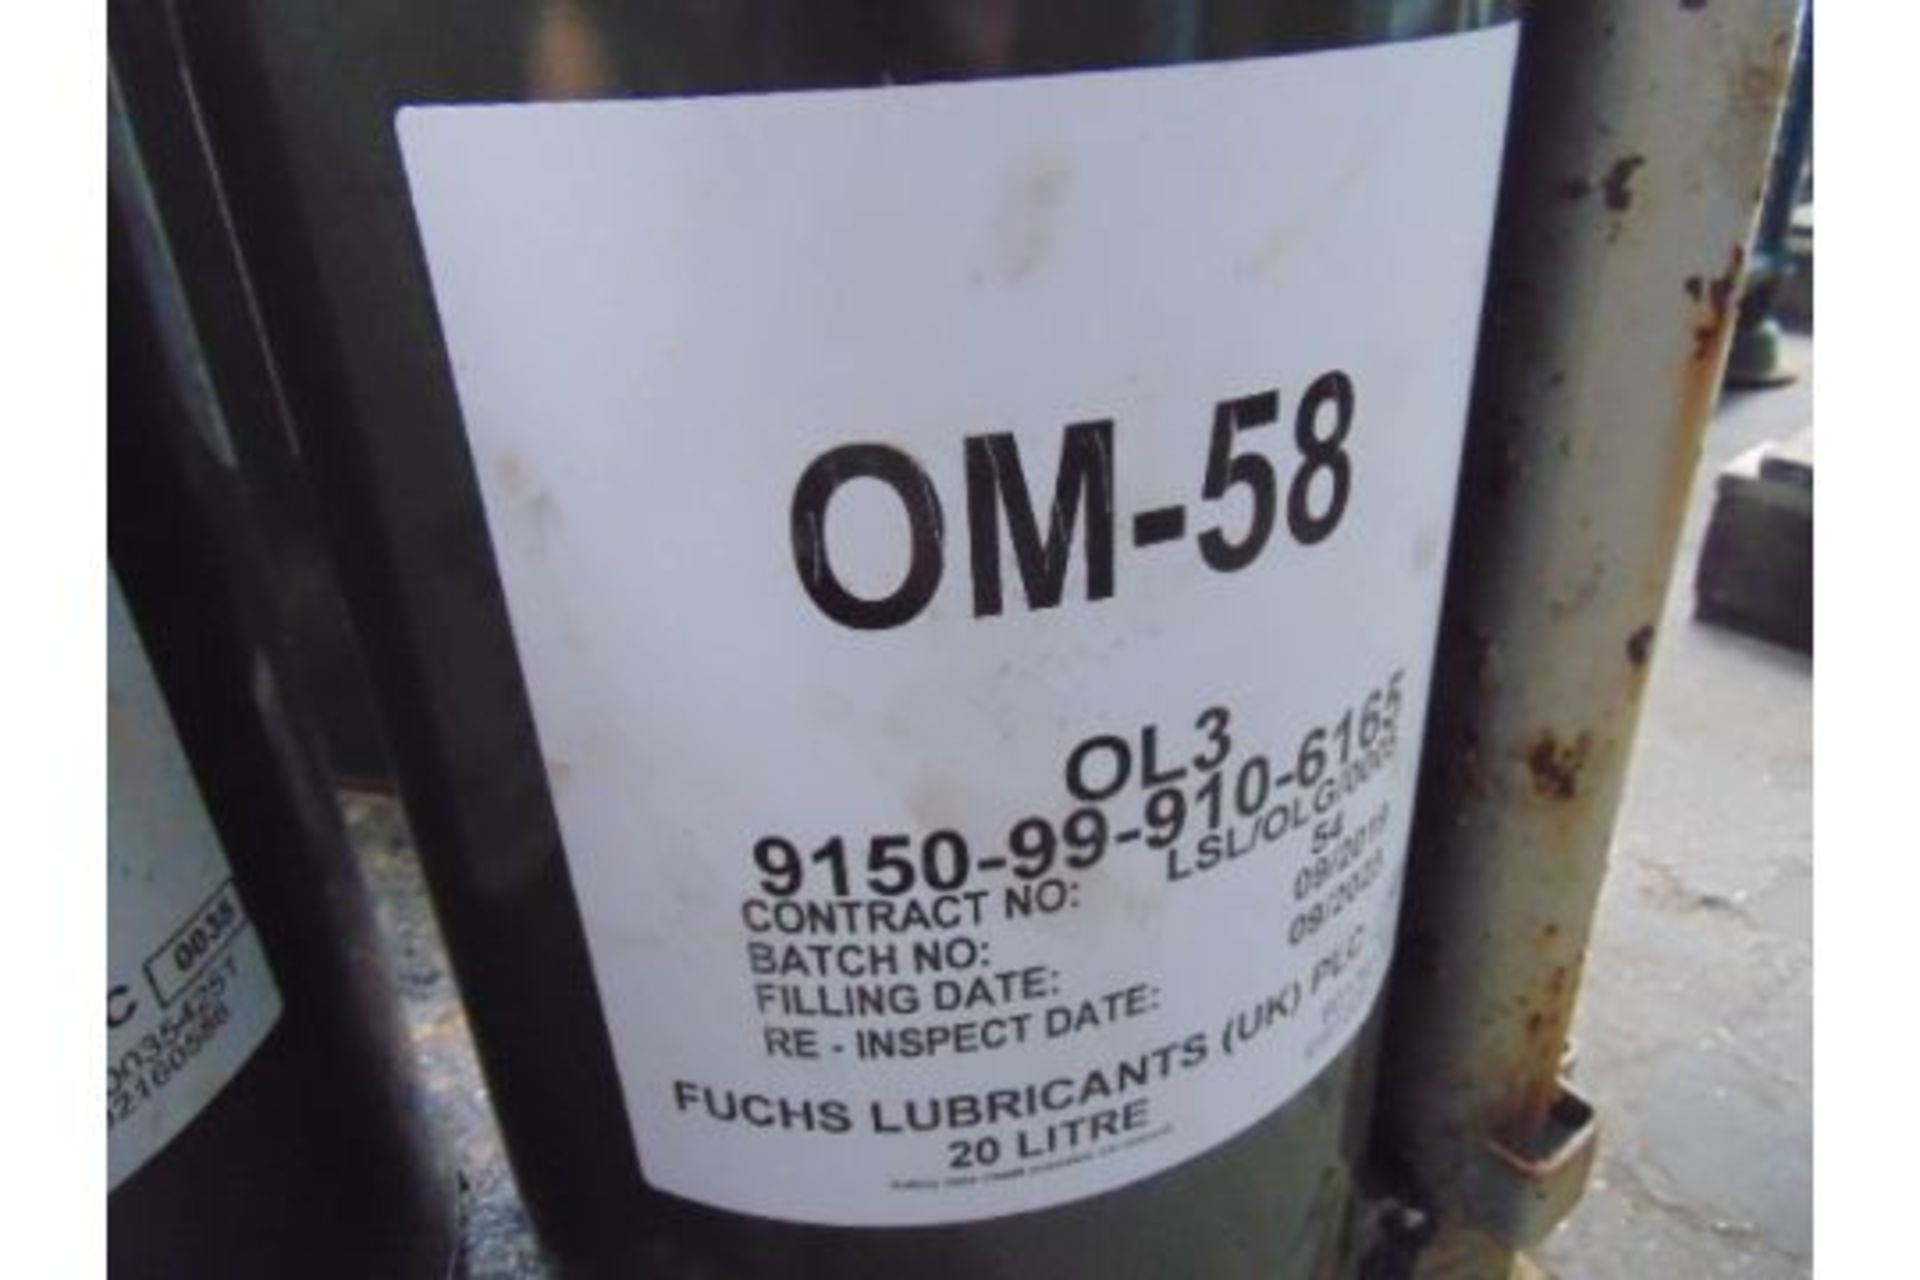 1 x Unissued 20L Drum of OM-58 High Quality Light Oil - Image 2 of 2